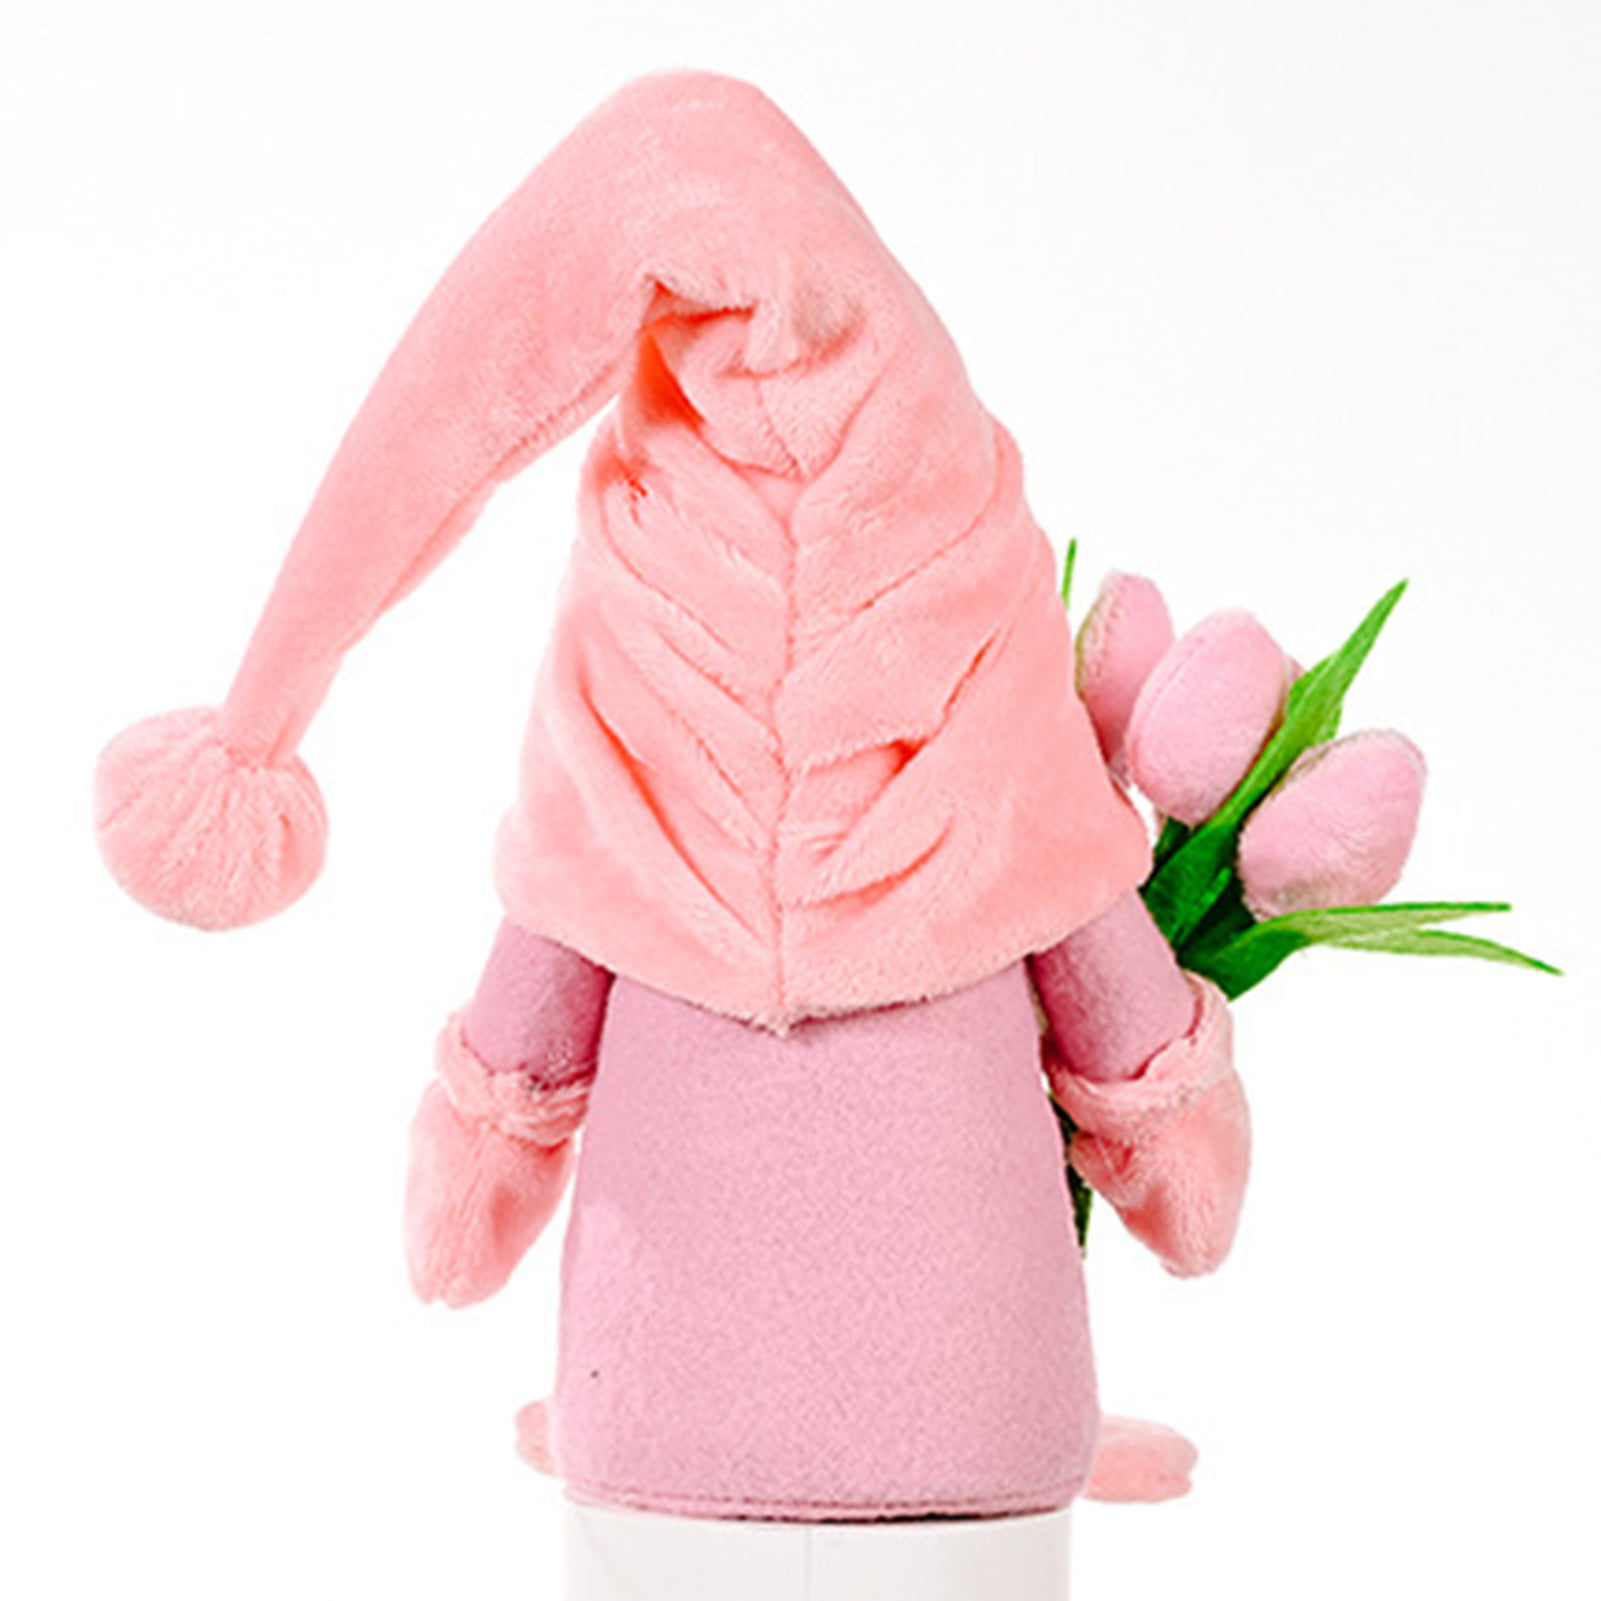 Details about   Mothers Day Faceless Doll Plush Decorative Fabric Tulip Plush Toy Gifts 